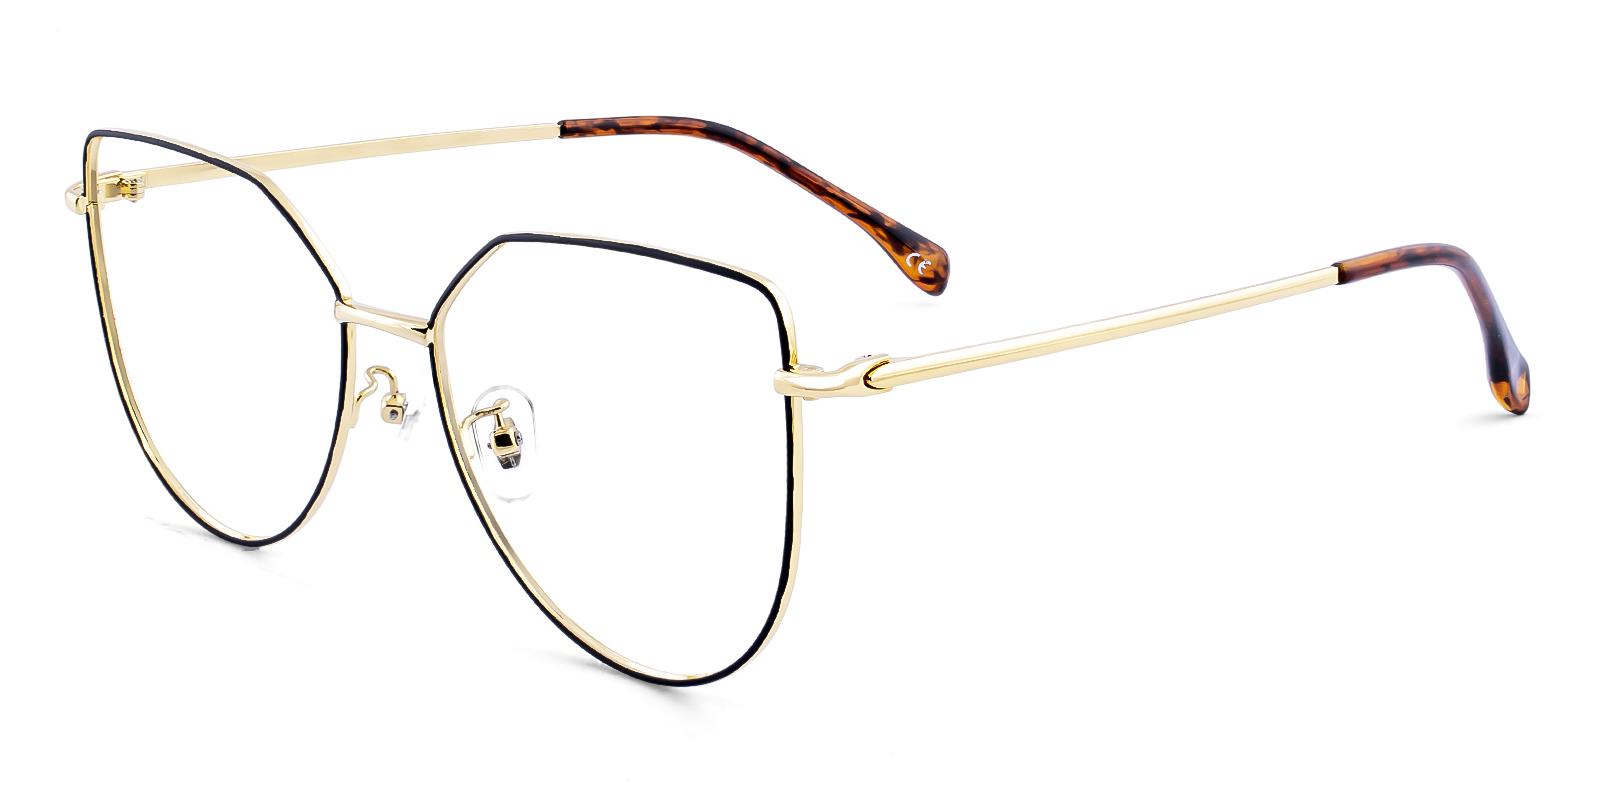 Pastth Gold Metal Eyeglasses , NosePads Frames from ABBE Glasses